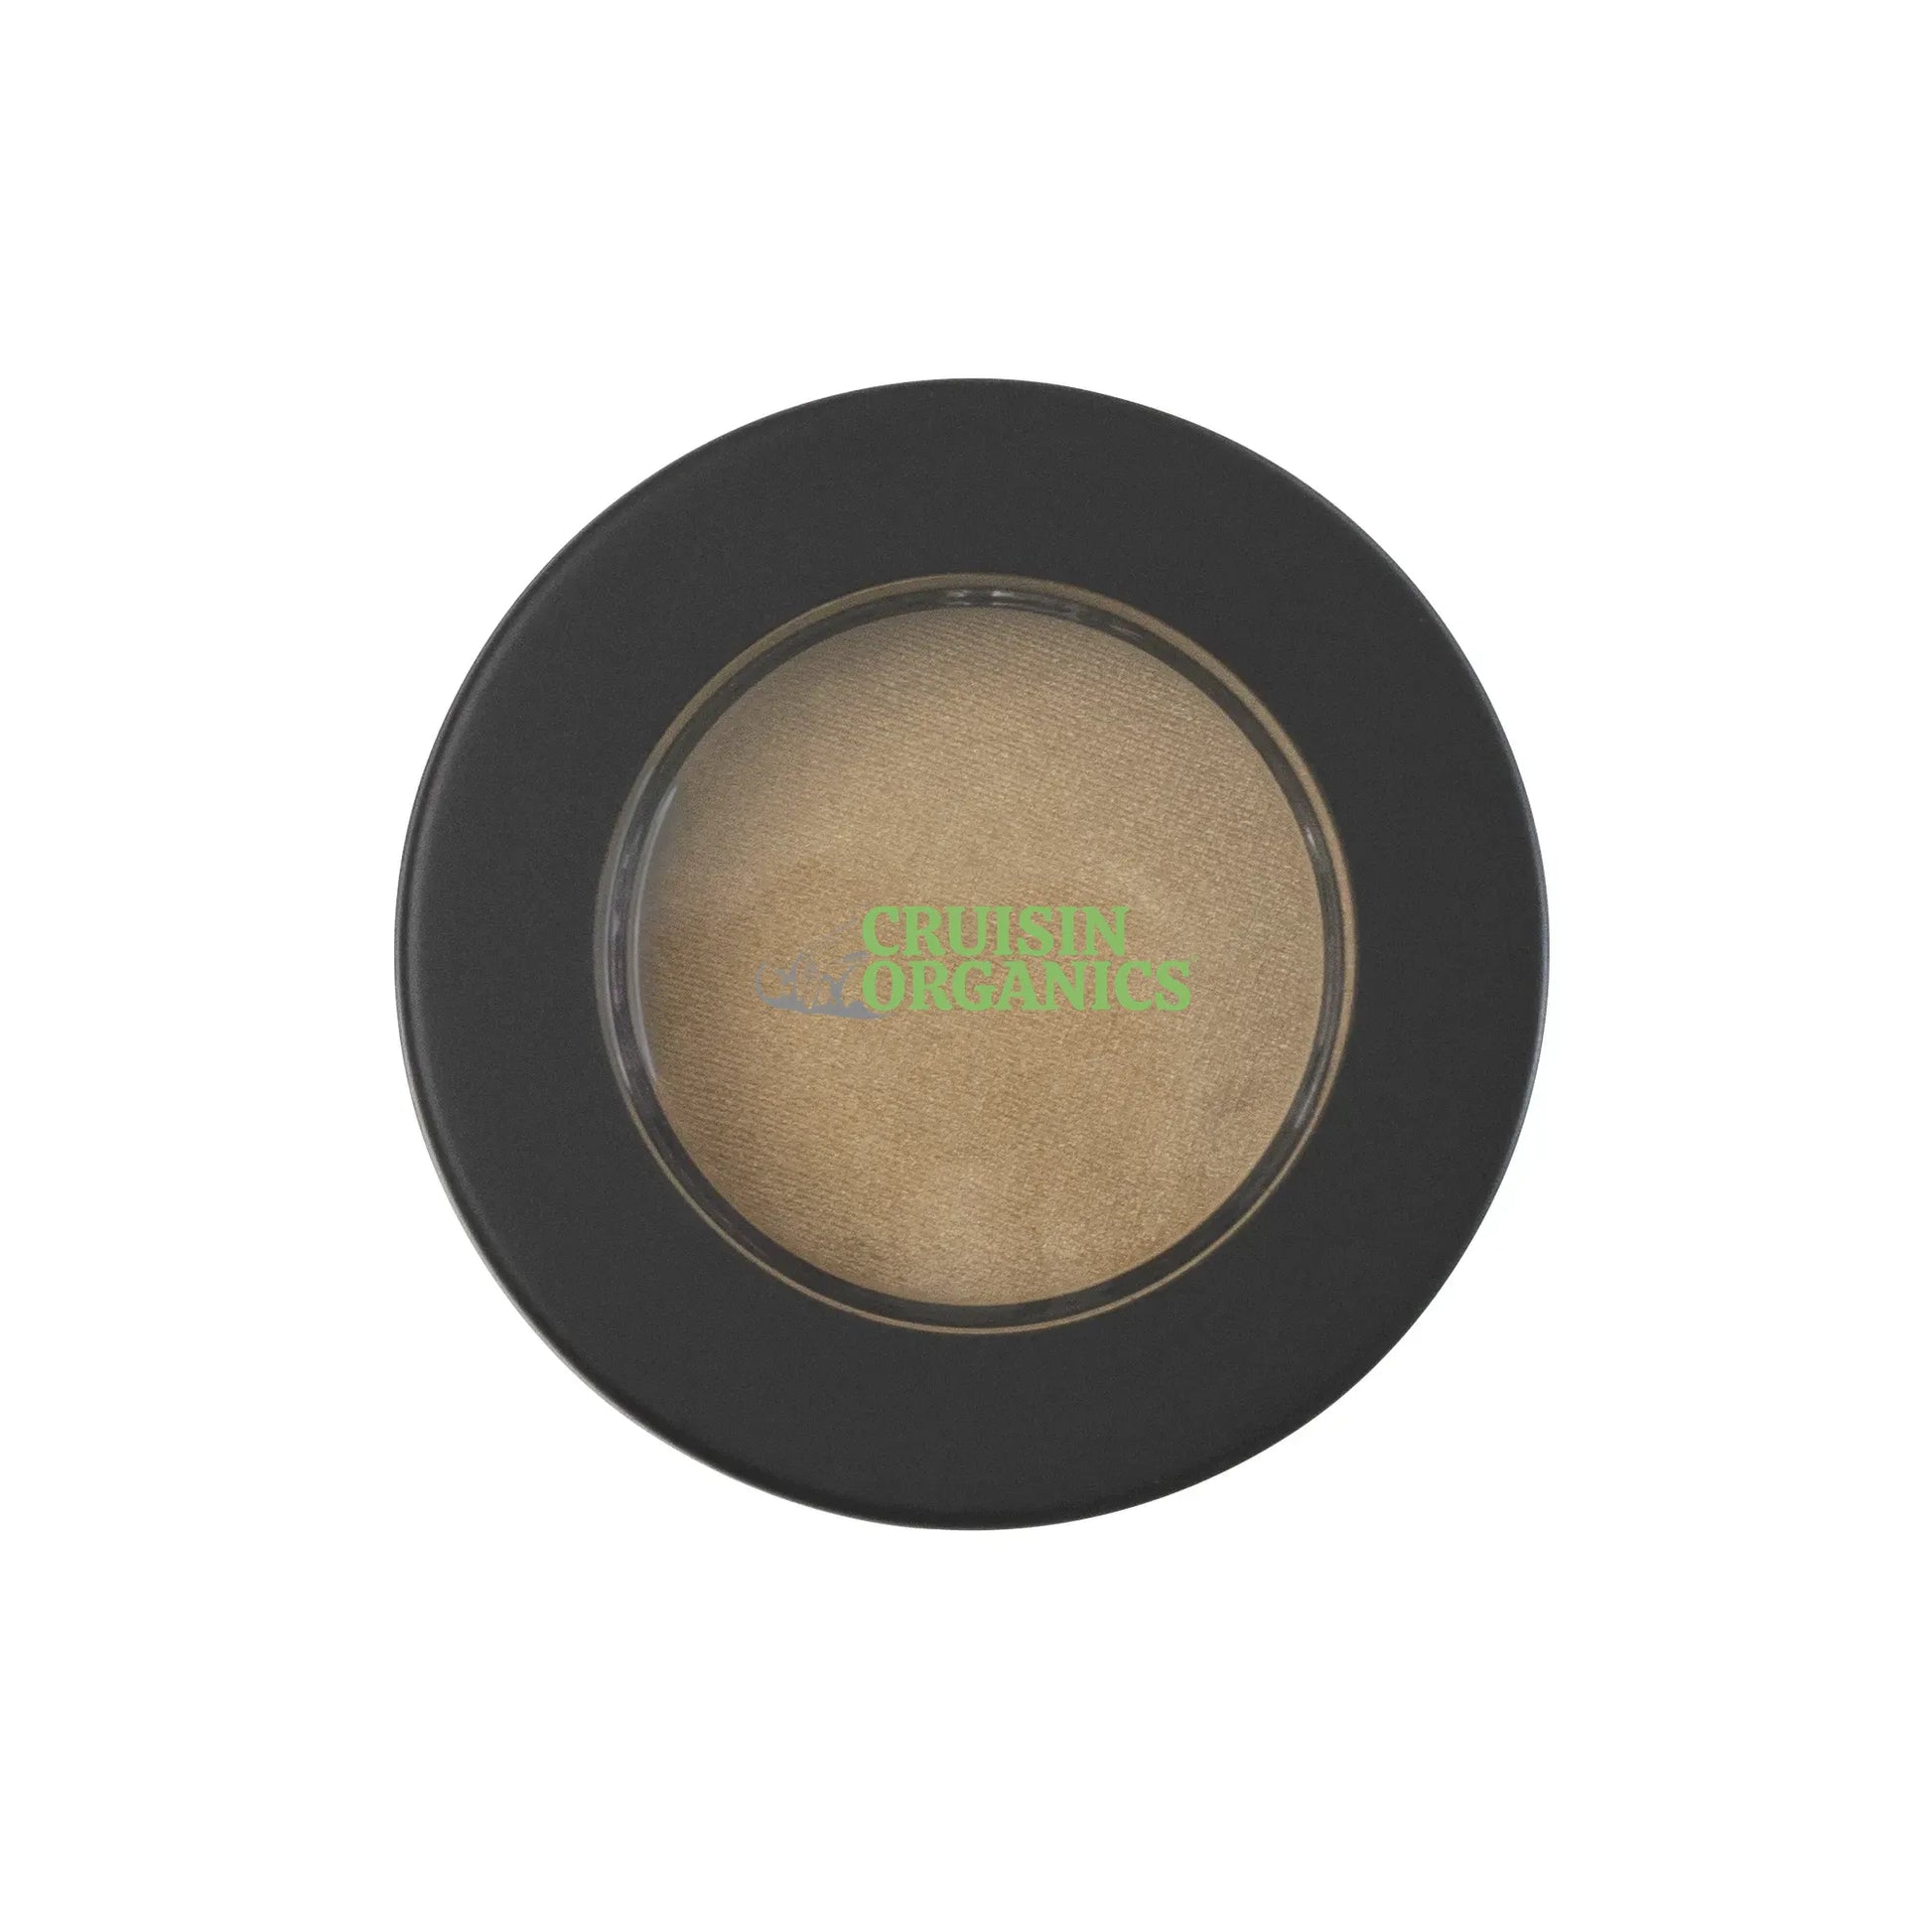 Cruisin Organics' Golden Egg BB Cream with SPF is a natural Single Pan Shadow that you've been searching for.